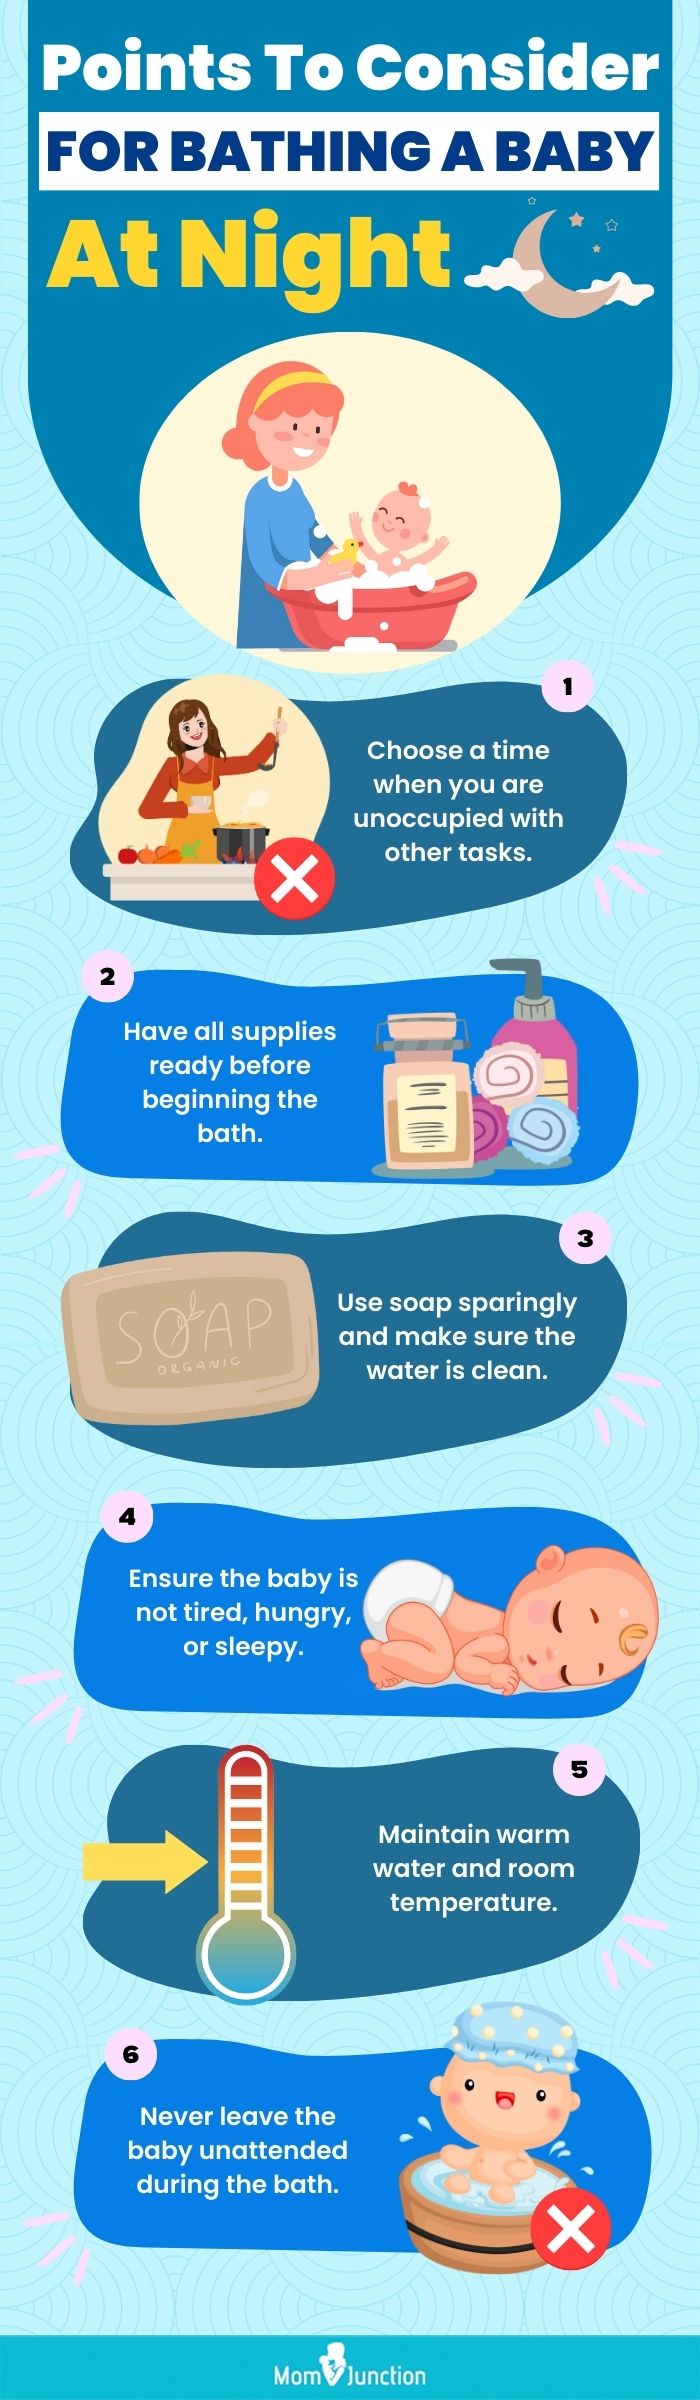 points to consider for bathing a baby at night (infographic)